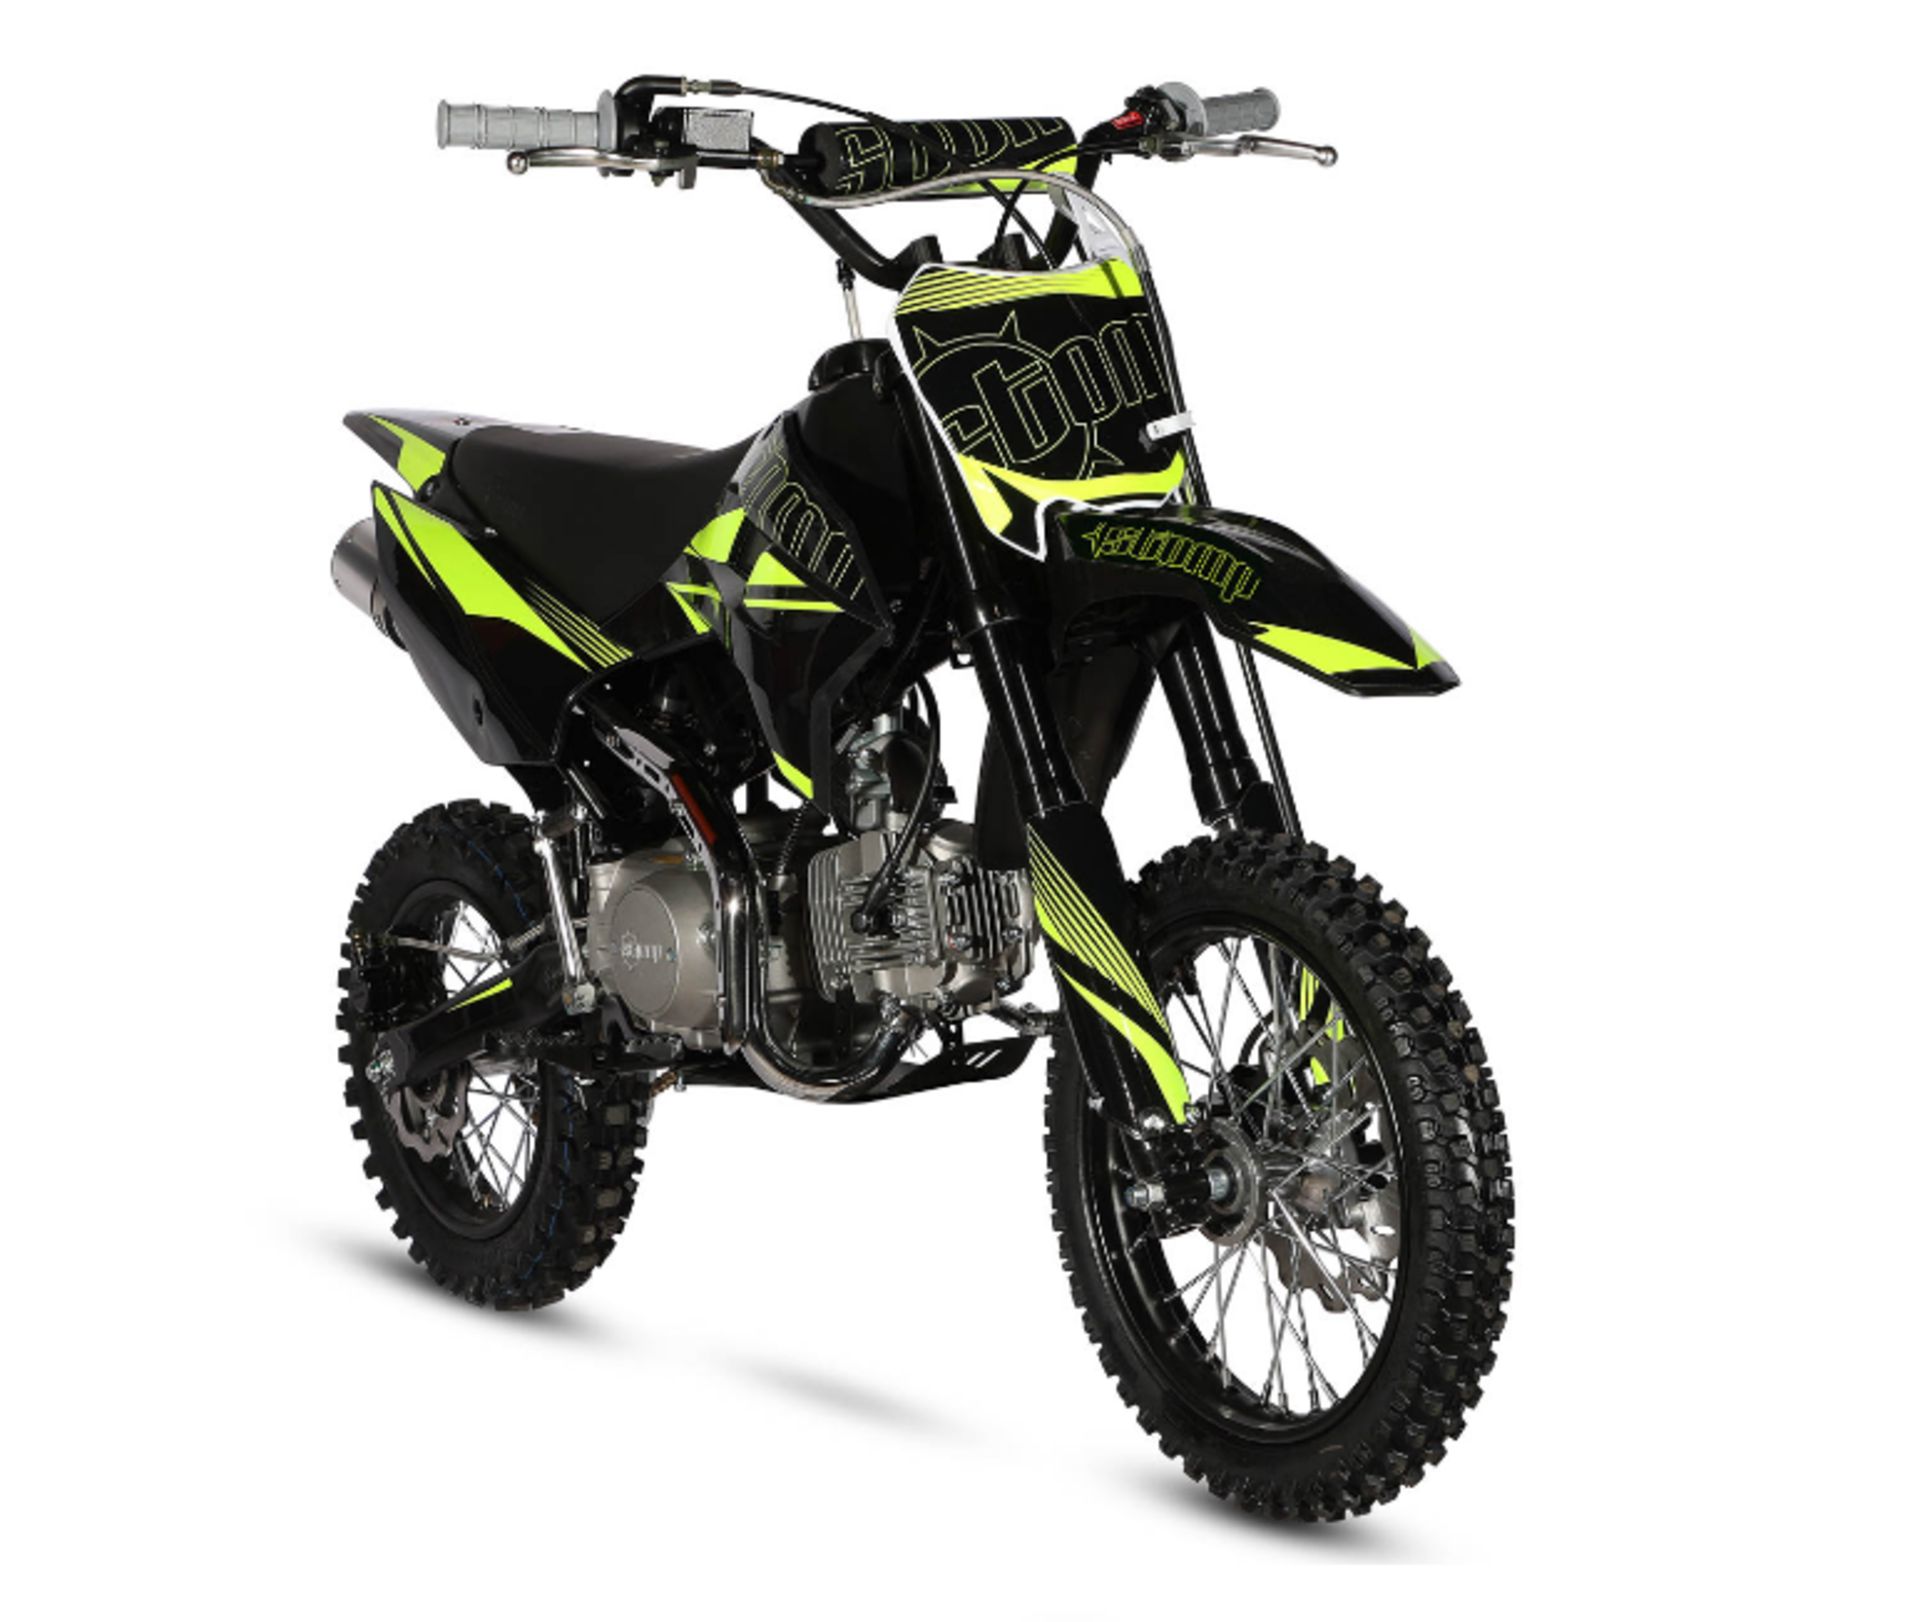 BRAND NEW STOMP SUPERSTOMP 120R PIT BIKE - Image 8 of 8